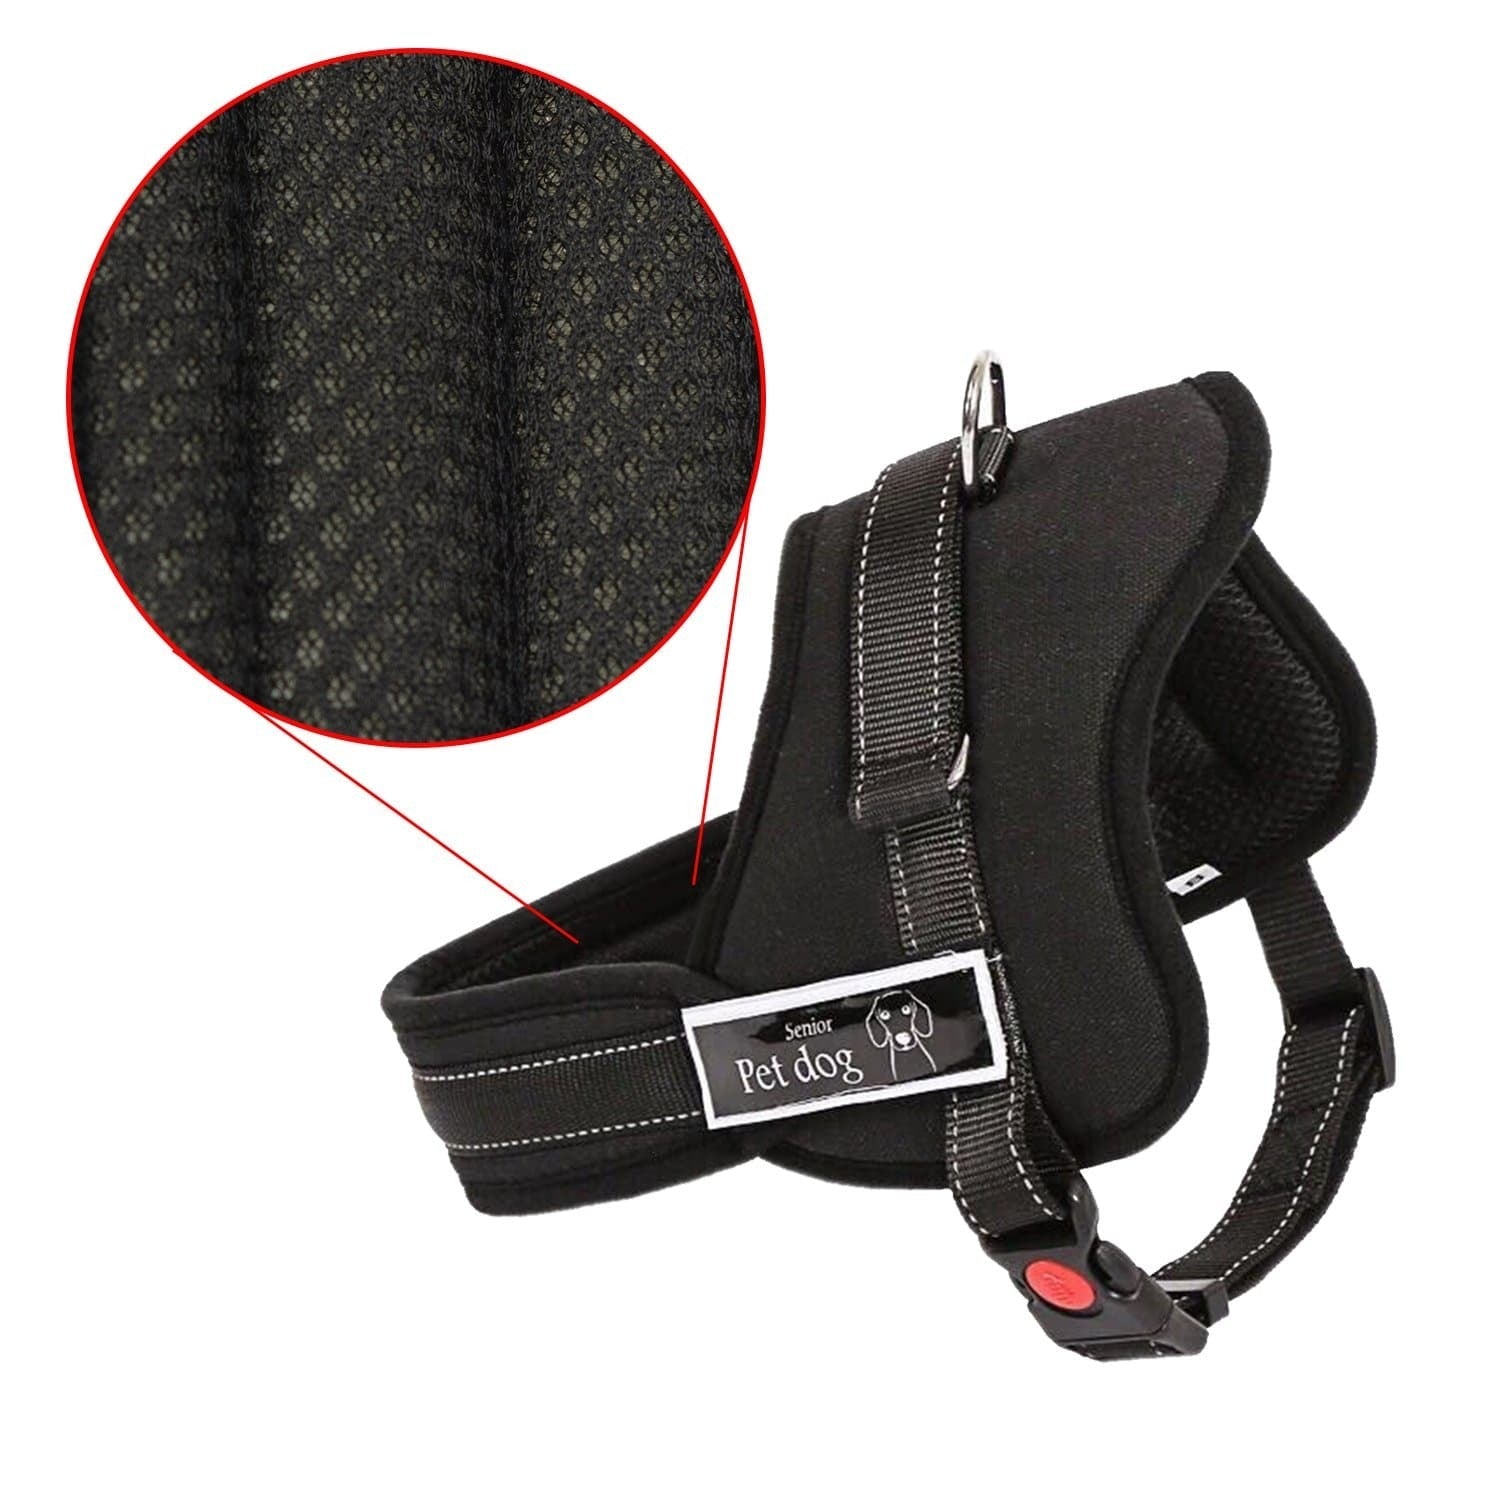 pet products Adjustable Pet Training Control Safety Hand Strap Size M